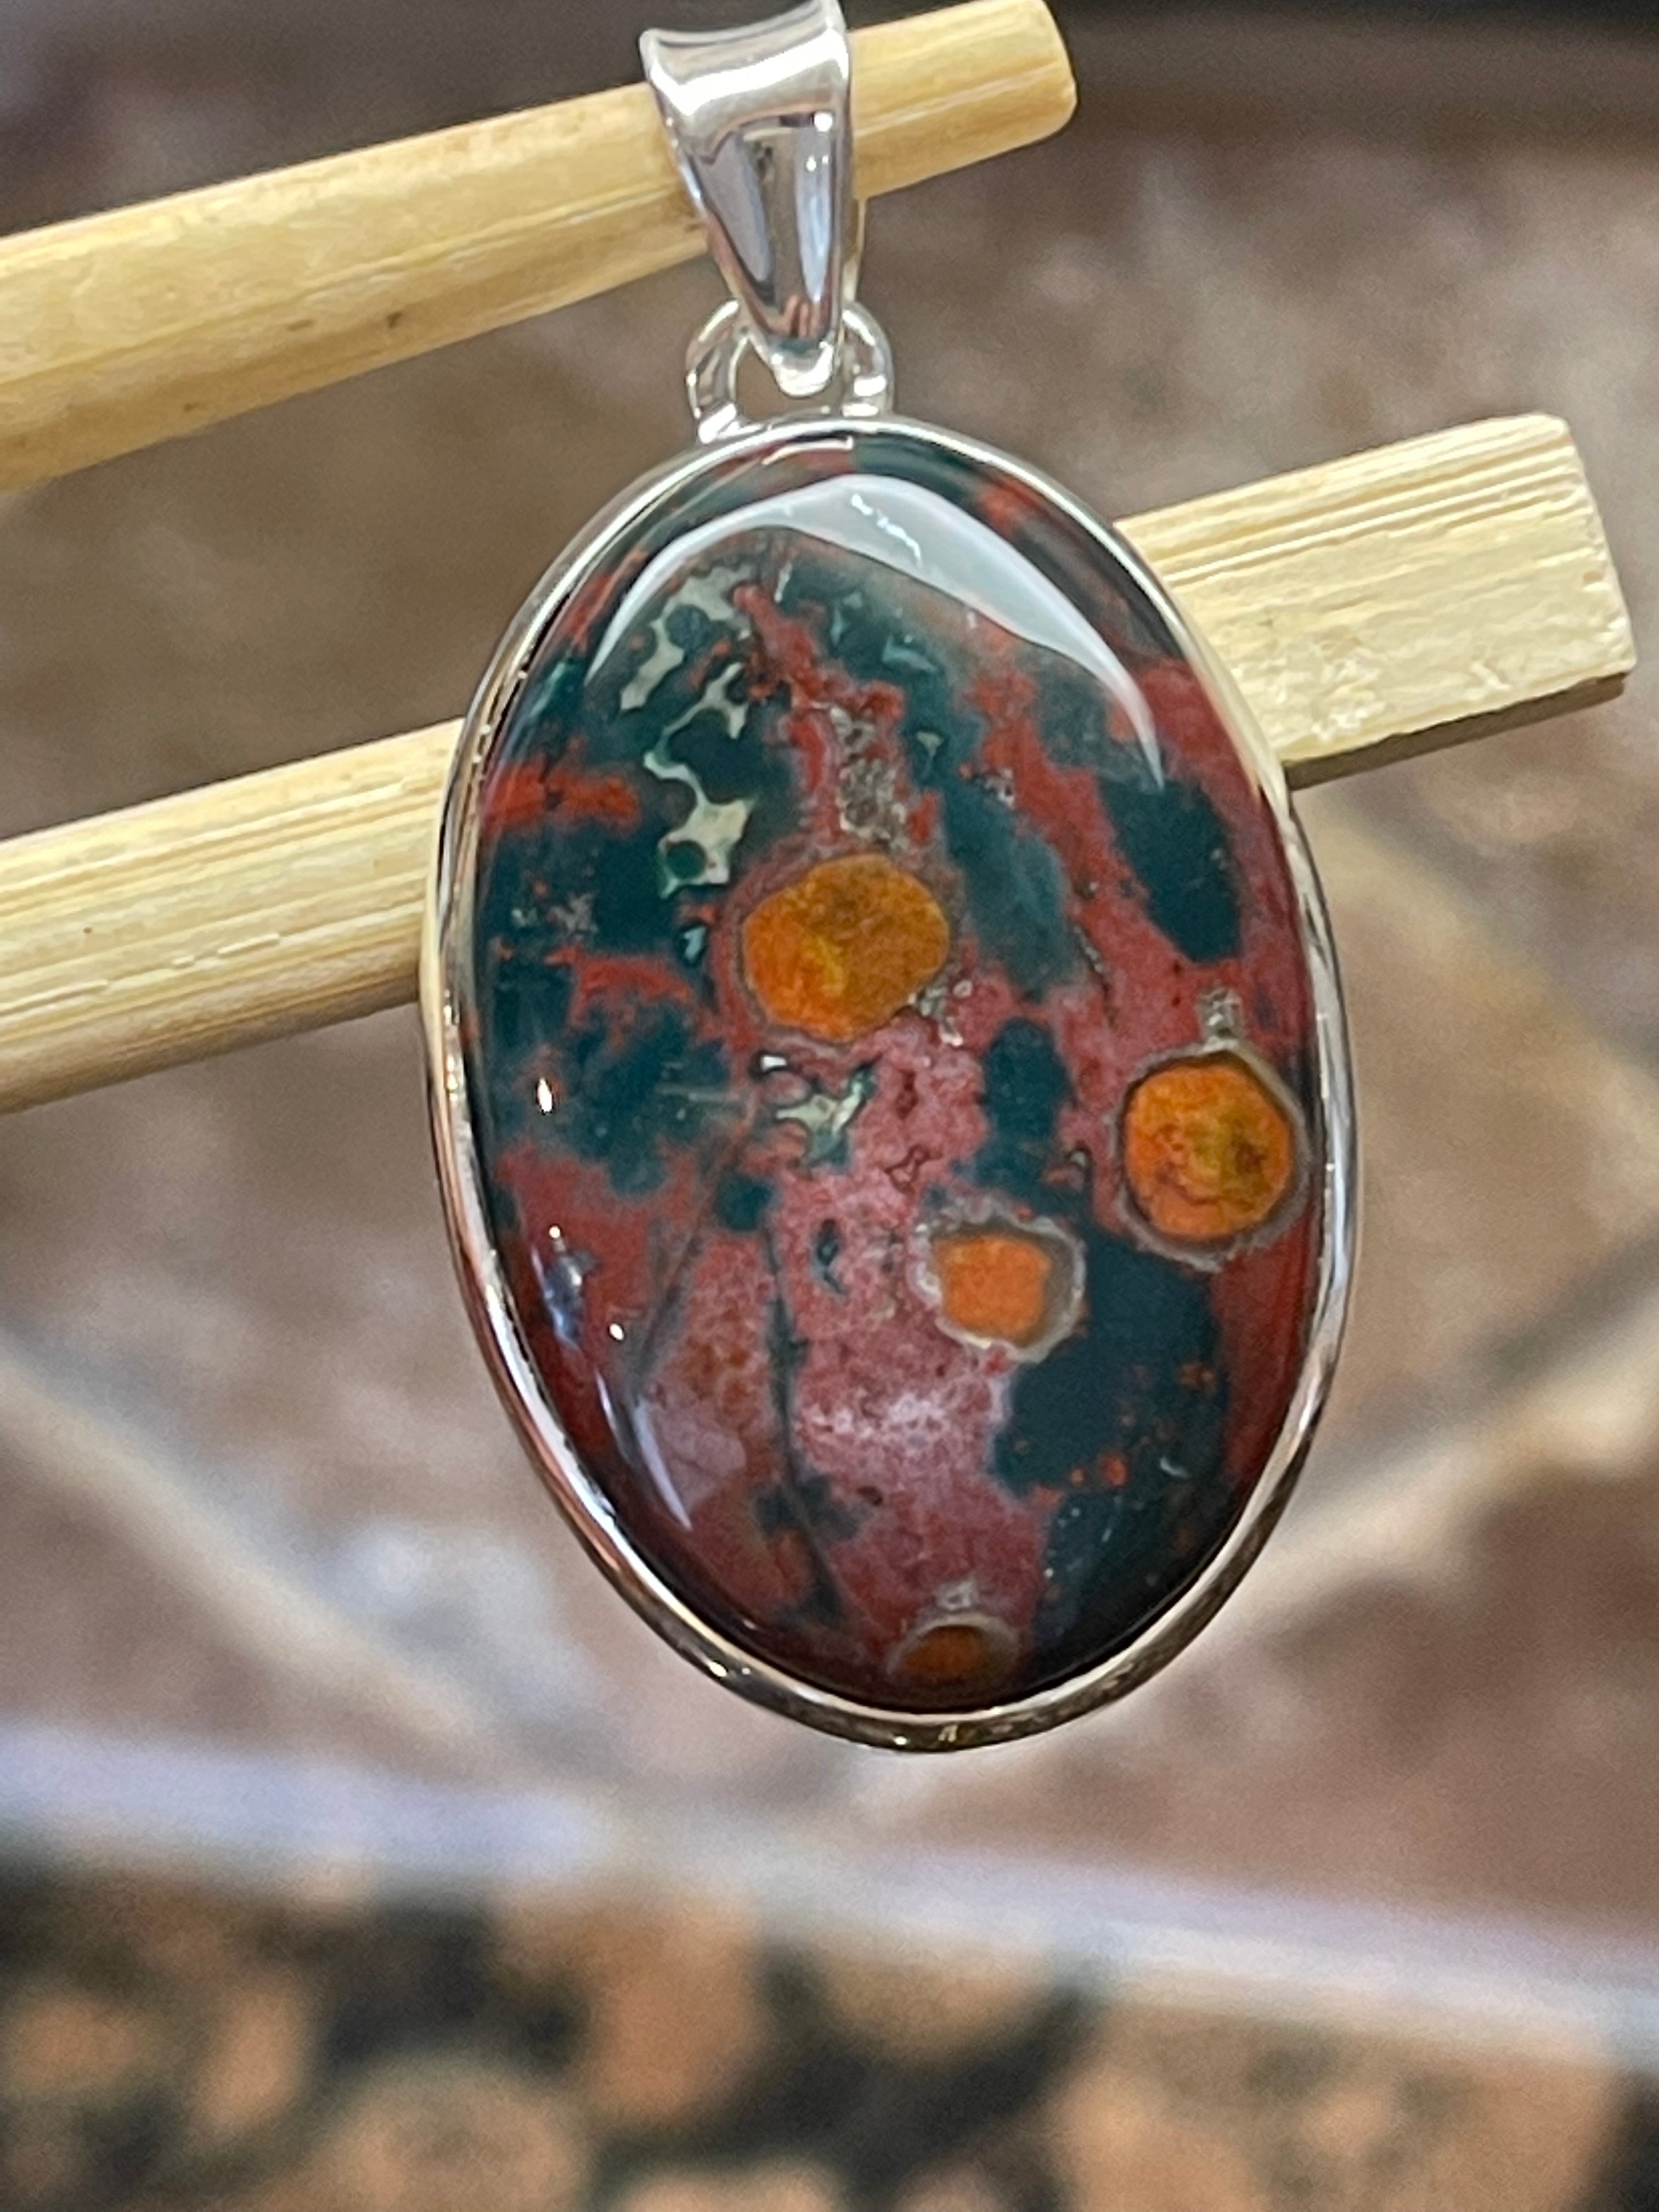 Natural Bloodstone, Heliotrope 925 Solid Sterling Silver Pendant 40mm - Natural Rocks by Kala